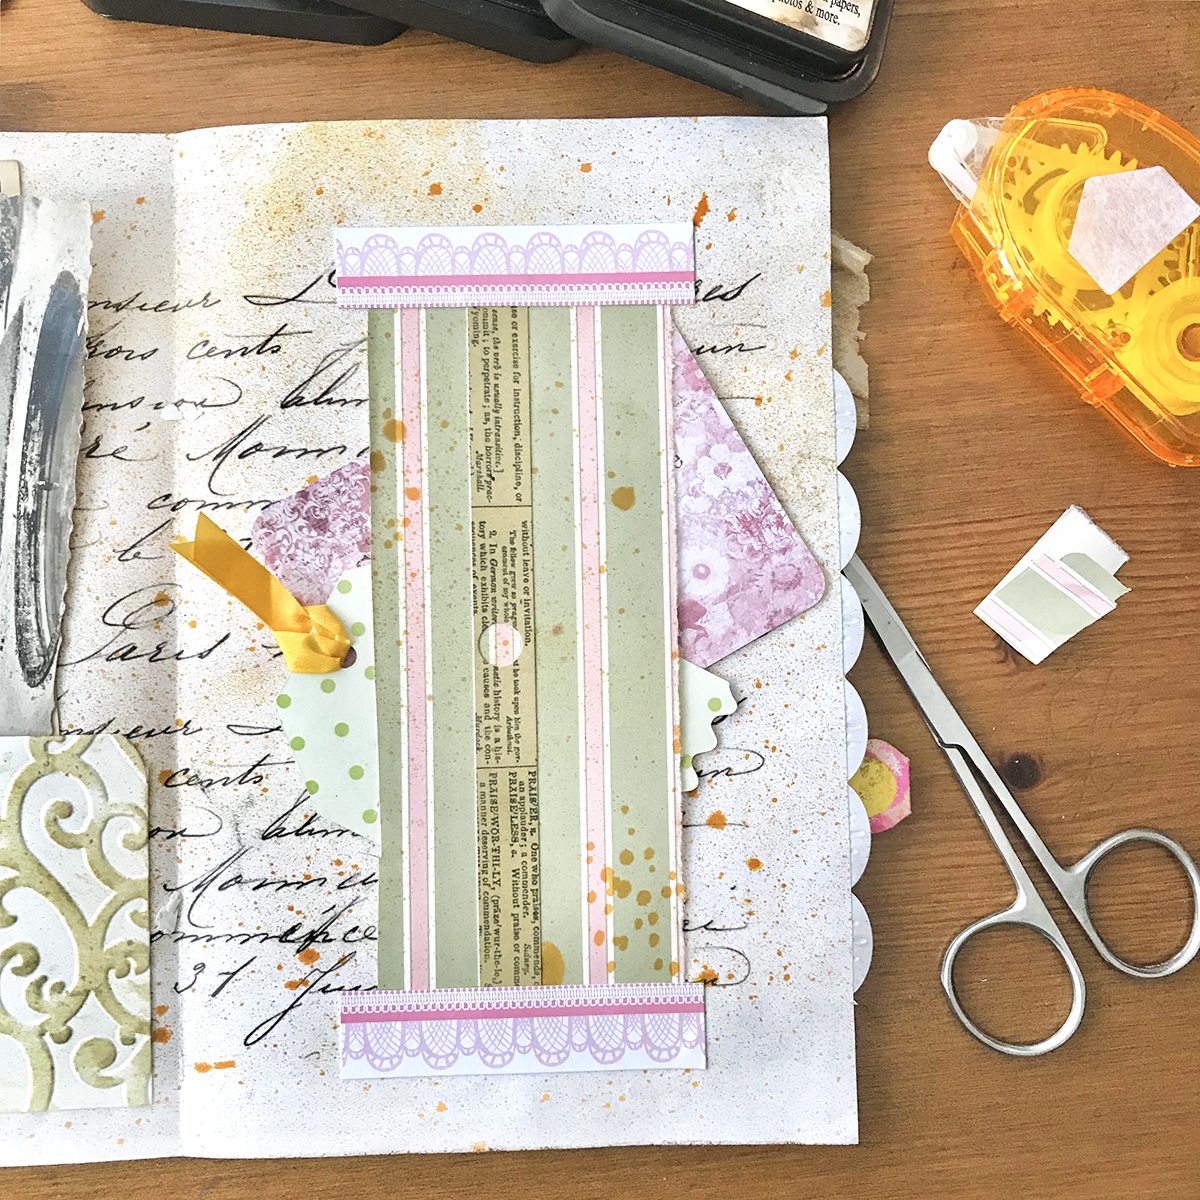 Journal page with scissors and tape